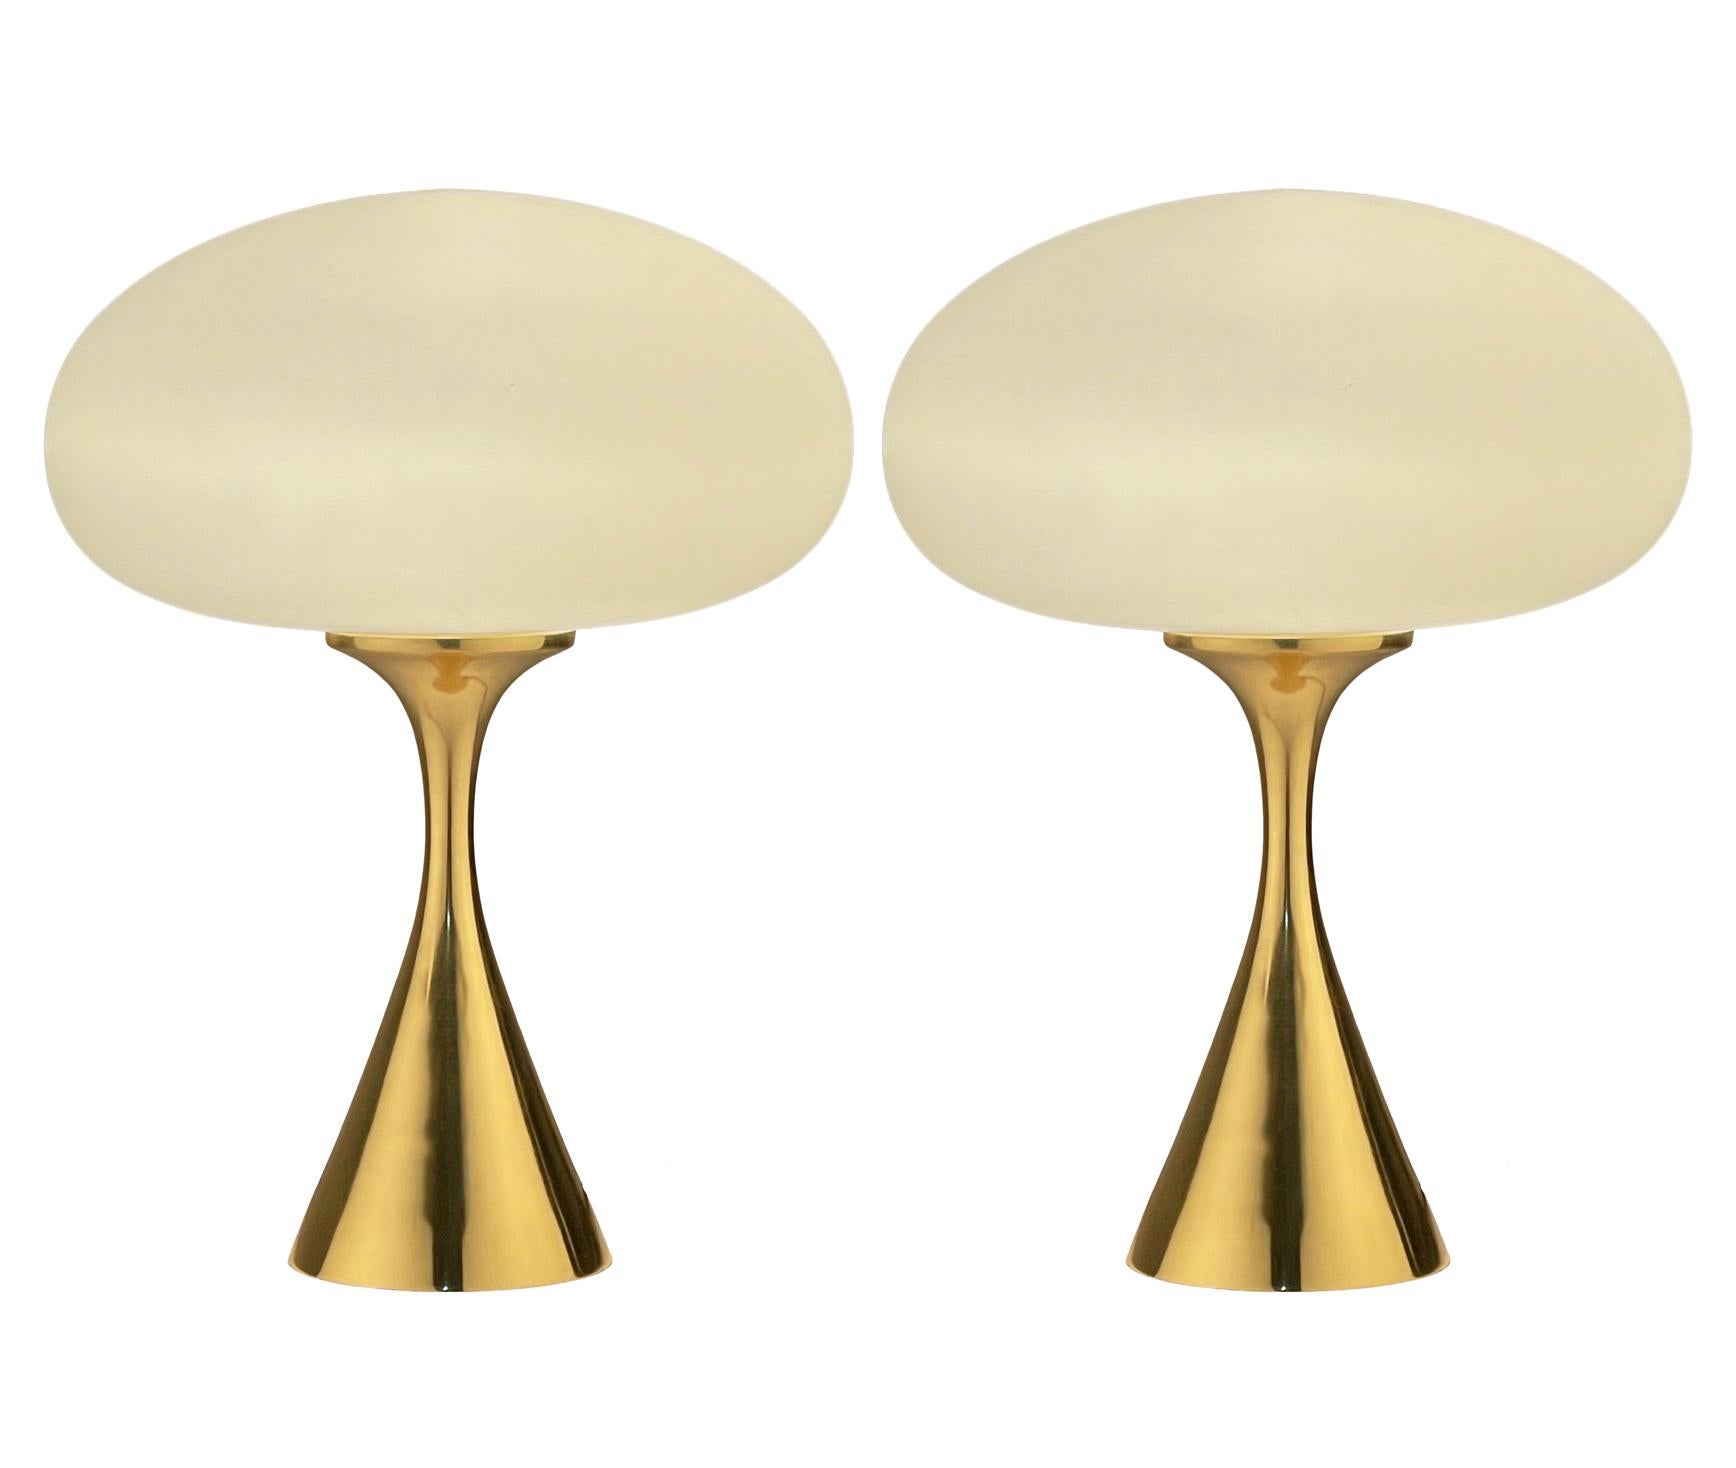 A handsome matching pair of table lamps in a conical mushroom form after Laurel Lamp Company. The lamps feature brass plated cast aluminum base with a mouth blown frosted glass lamp shade. Price includes the pair as shown.